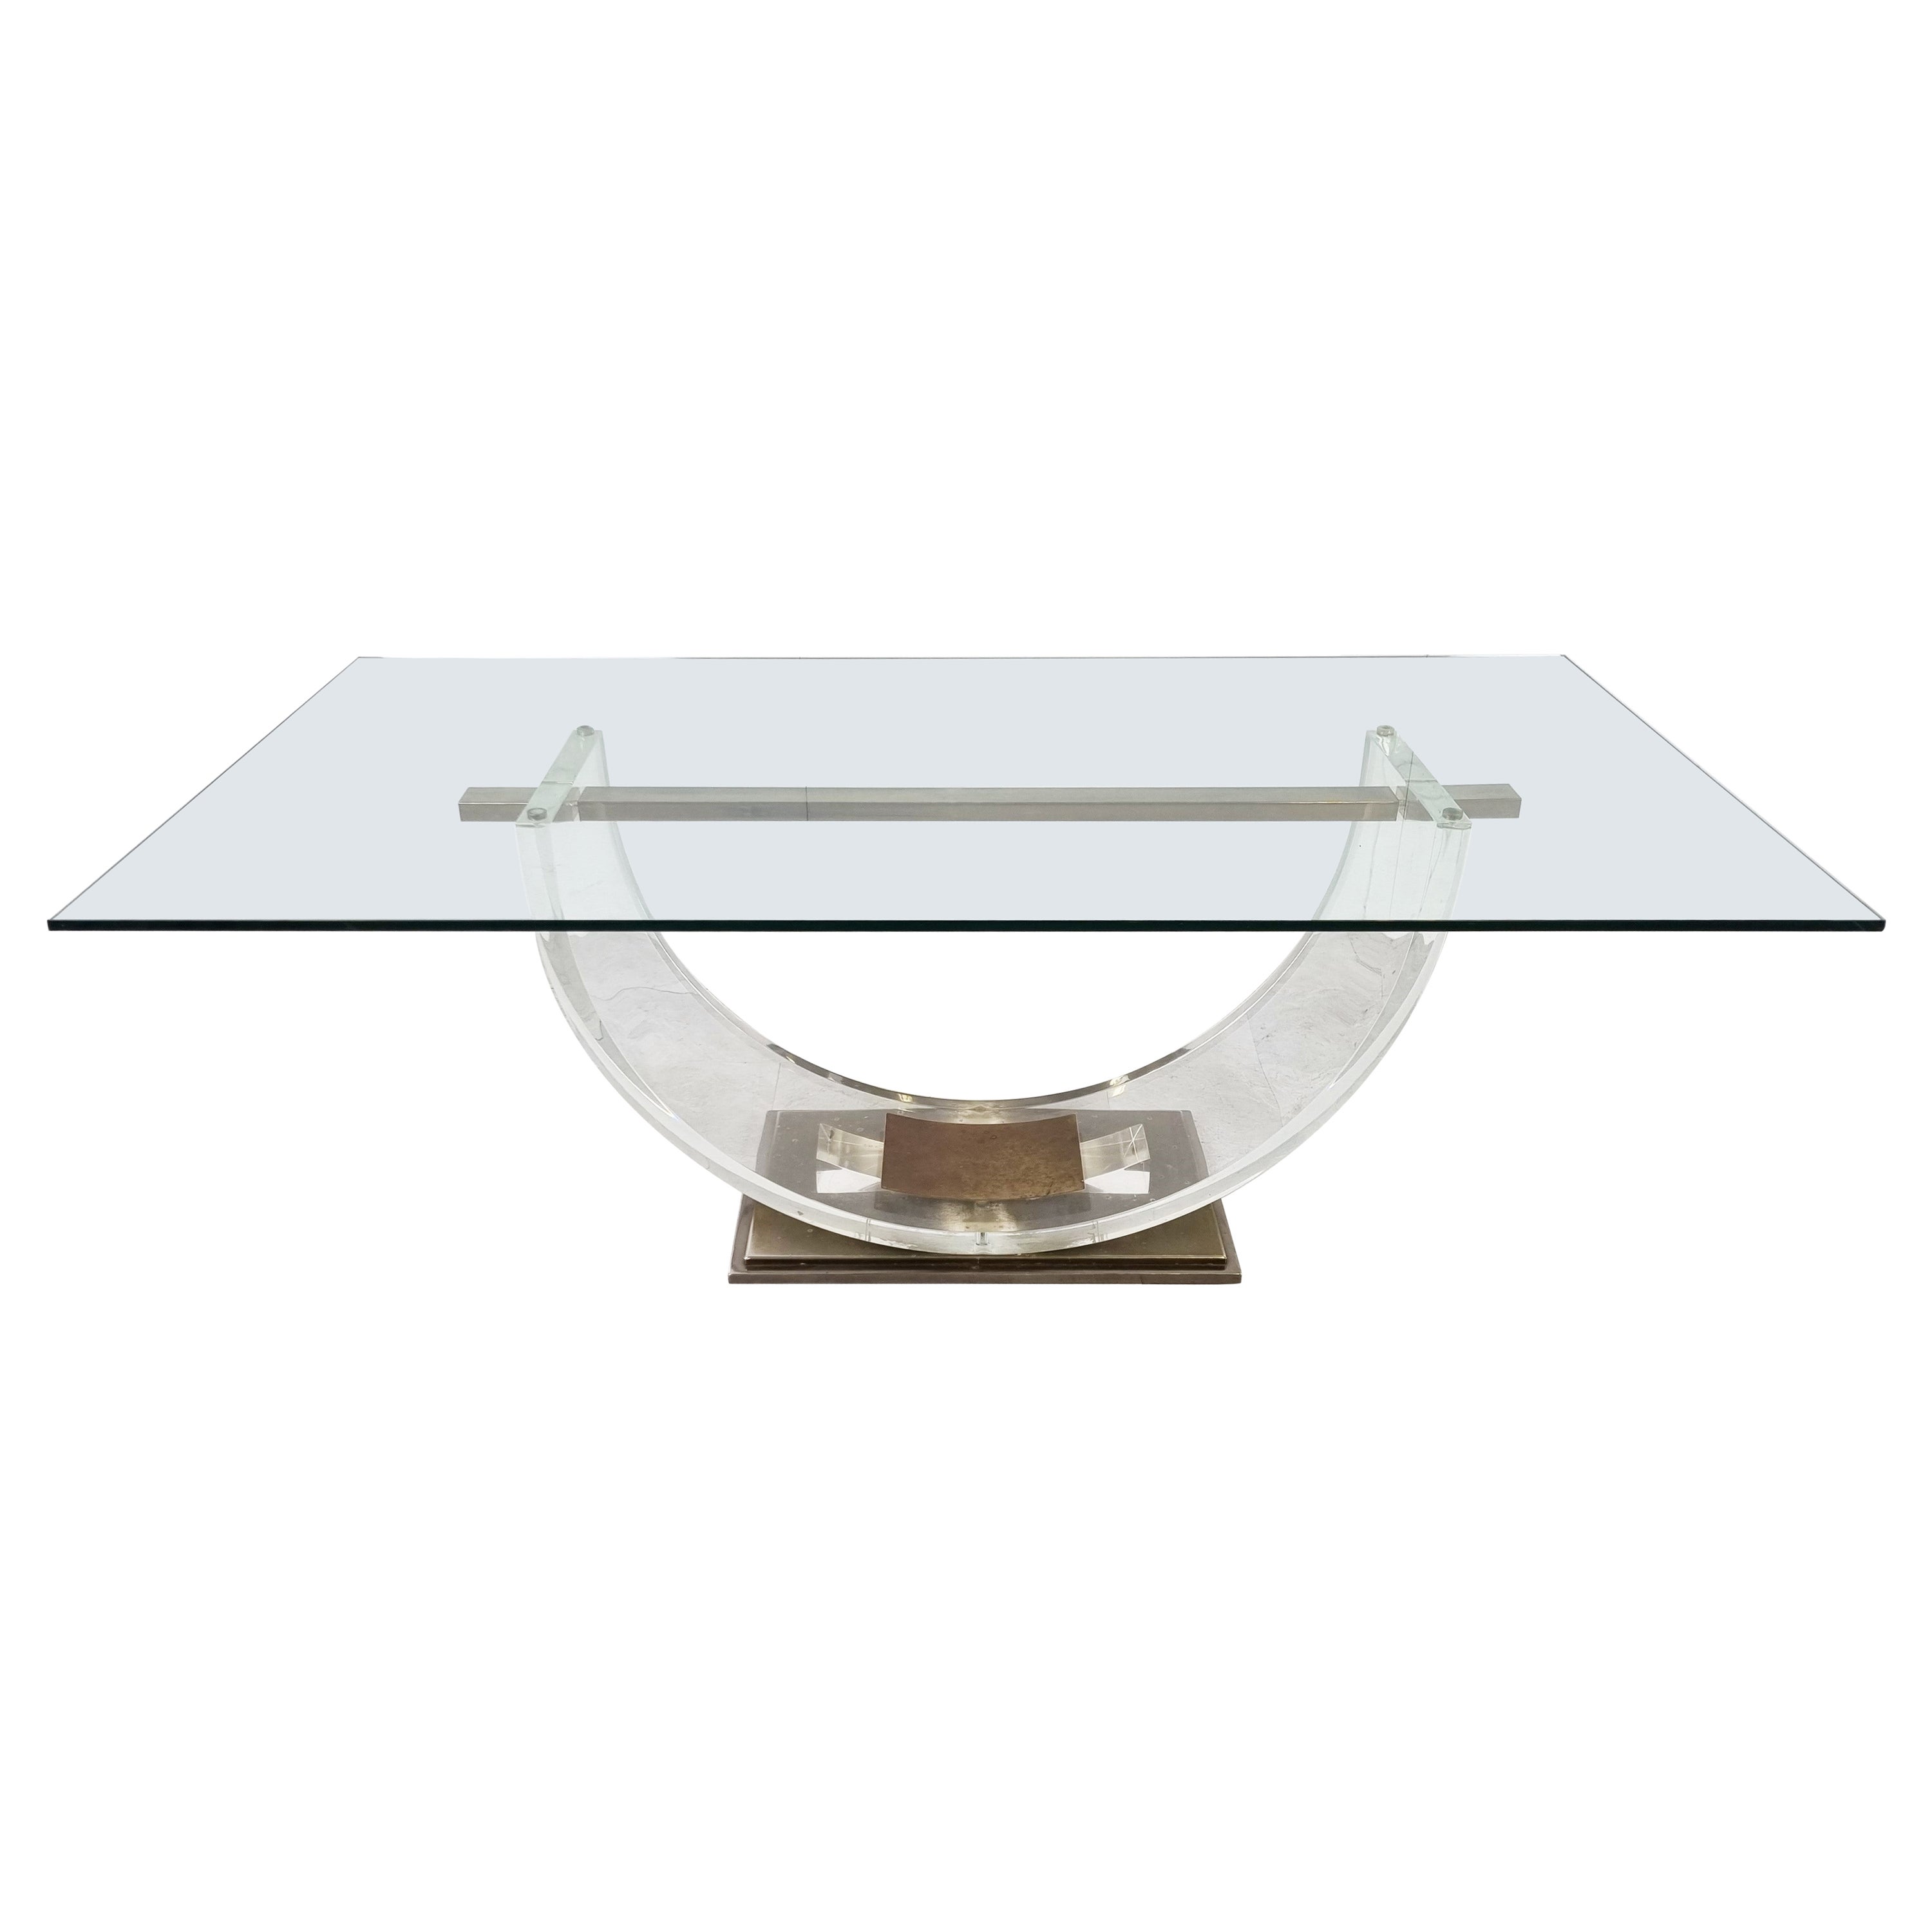 Round table triana glass lid and legs chrome 110 cm. 